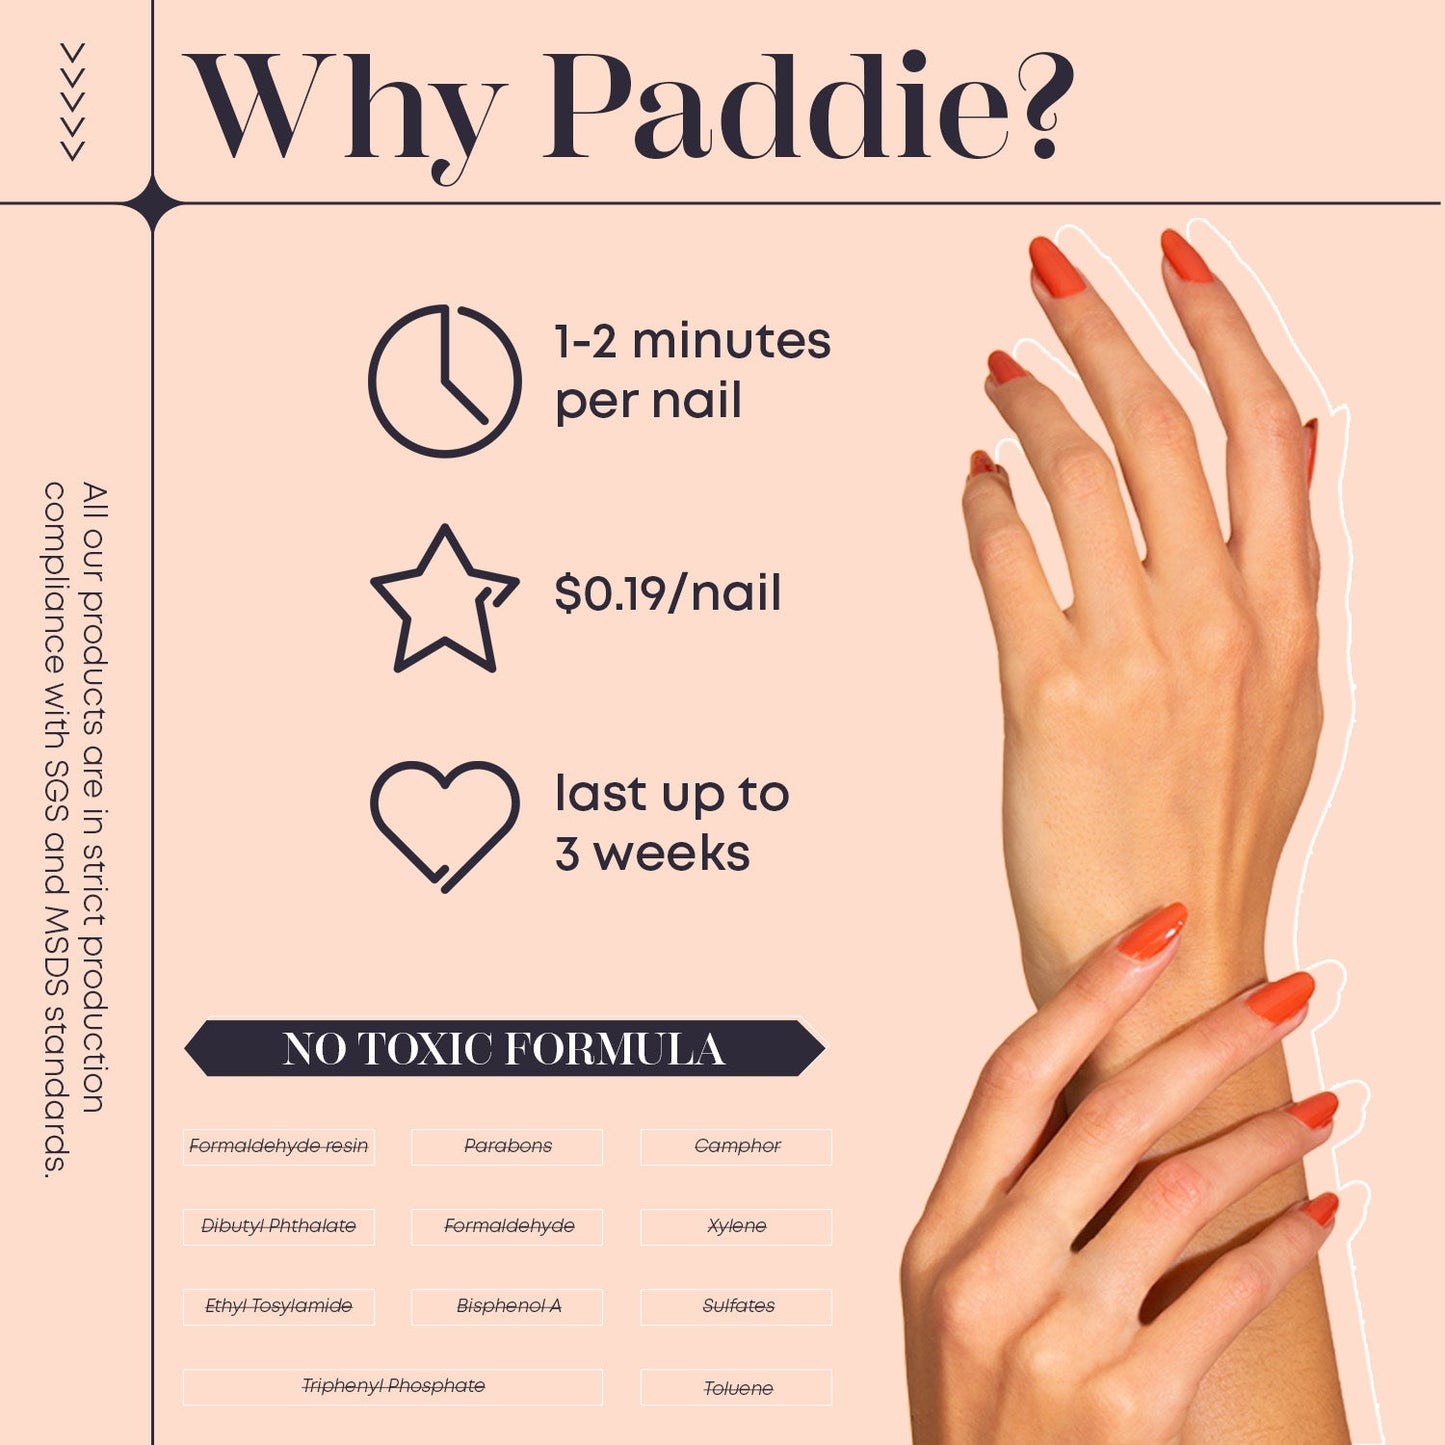 Paddie’s Polygel Intermediate Kit offers -  application in under 1-2 minutes per nail, costs only $0.19 per nail, lasts up to 3 weeks, and contains no harmful chemicals.